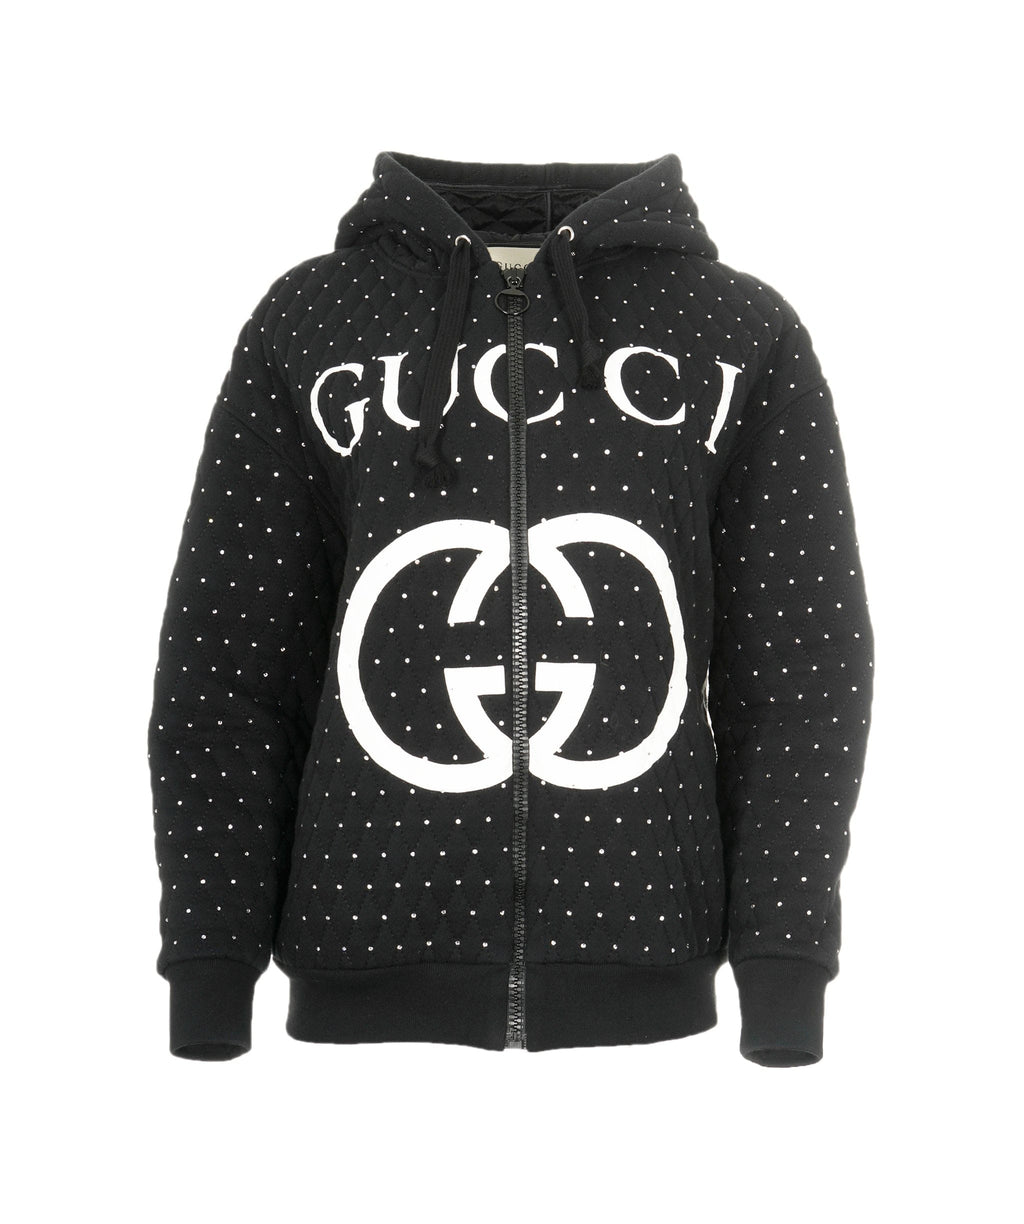 Gucci Jackets & Coats | Bomber, Puffer, Leather Styles | Flannels